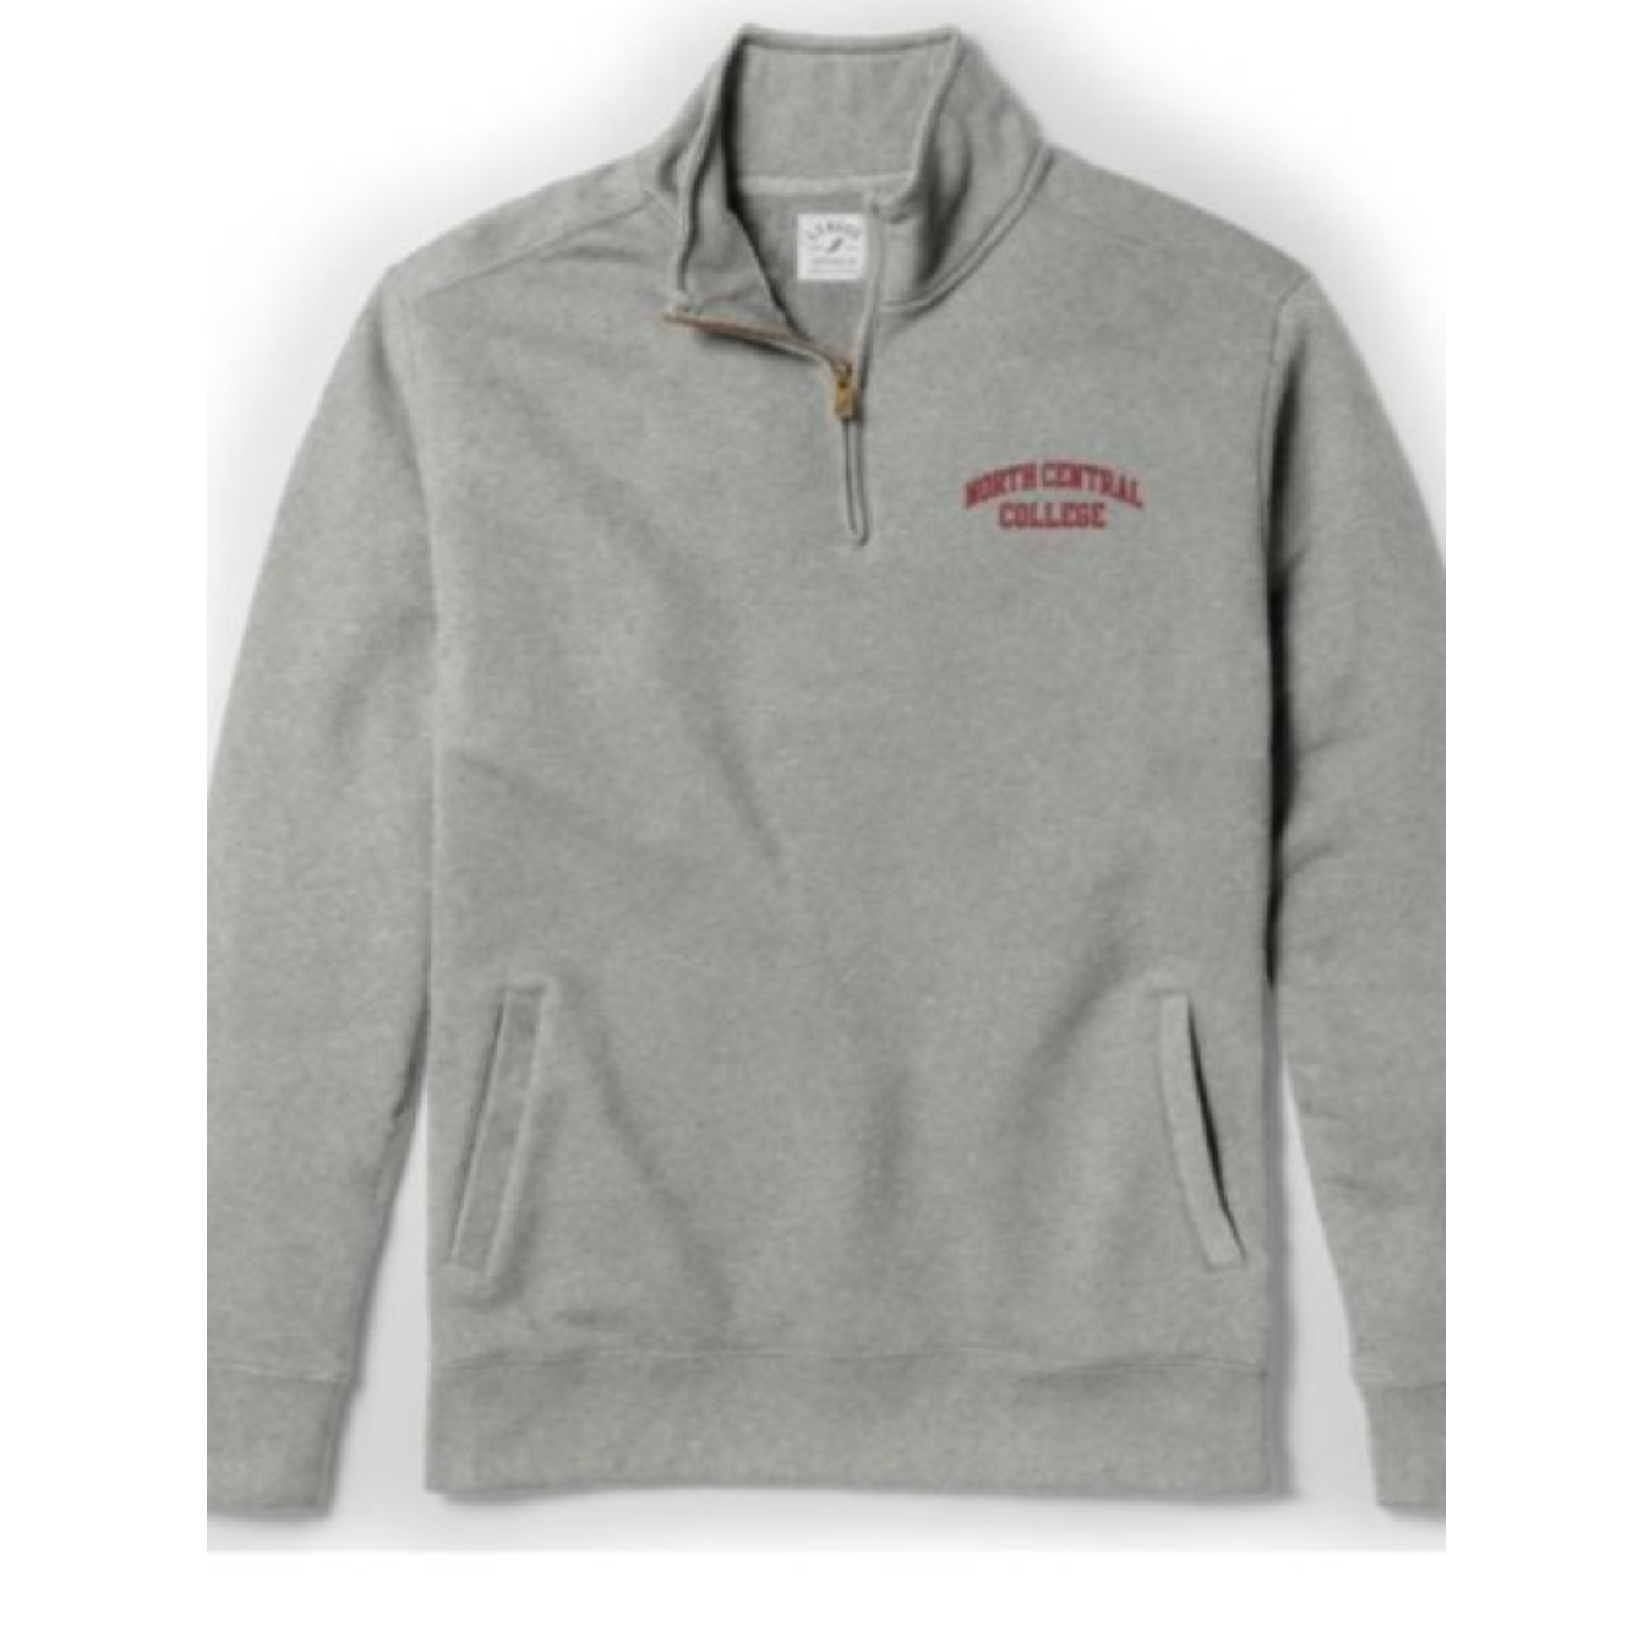 League / Legacy North Central College Stadium 1/4 Zip Victory Grey